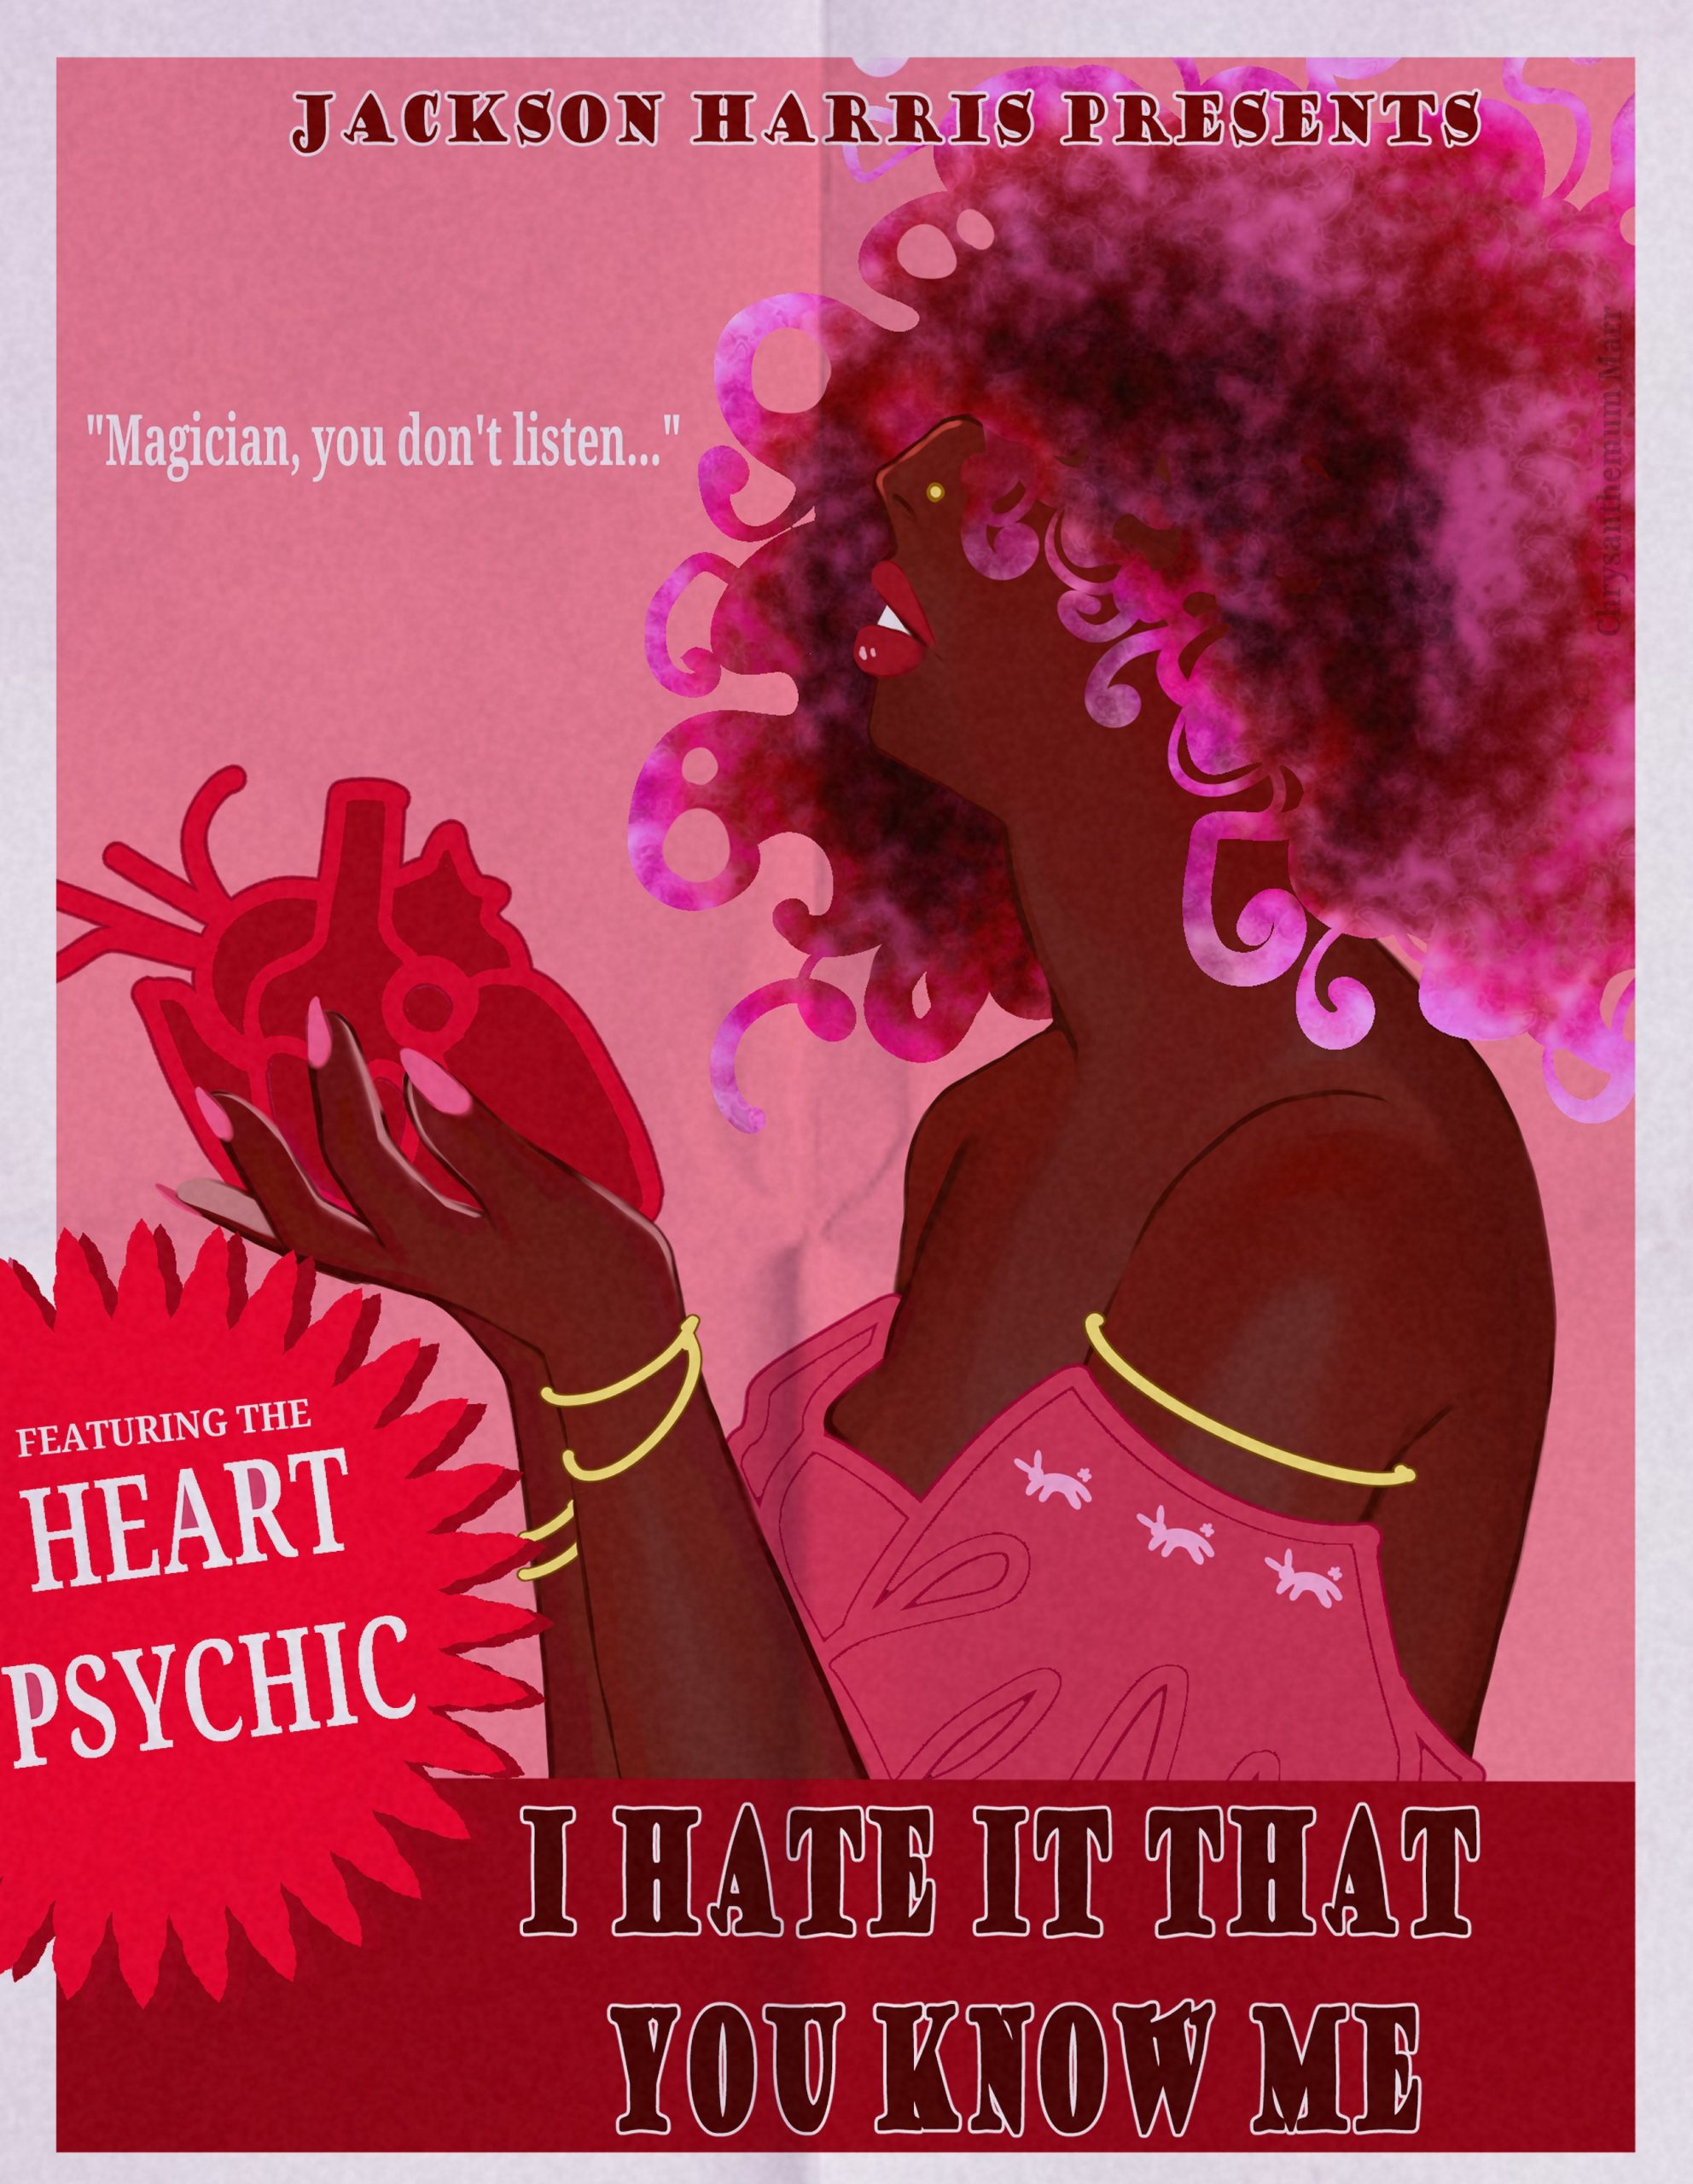 illustrated movie poster reading "jackson harris presents: I hate it that you know me. featuring the heart psychic. magician you don't listen." it depicts a black woman with a magenta afro wearing an off the shoulder deep pink flowy top and gold bangles as she. holds a beating anatomical heart.